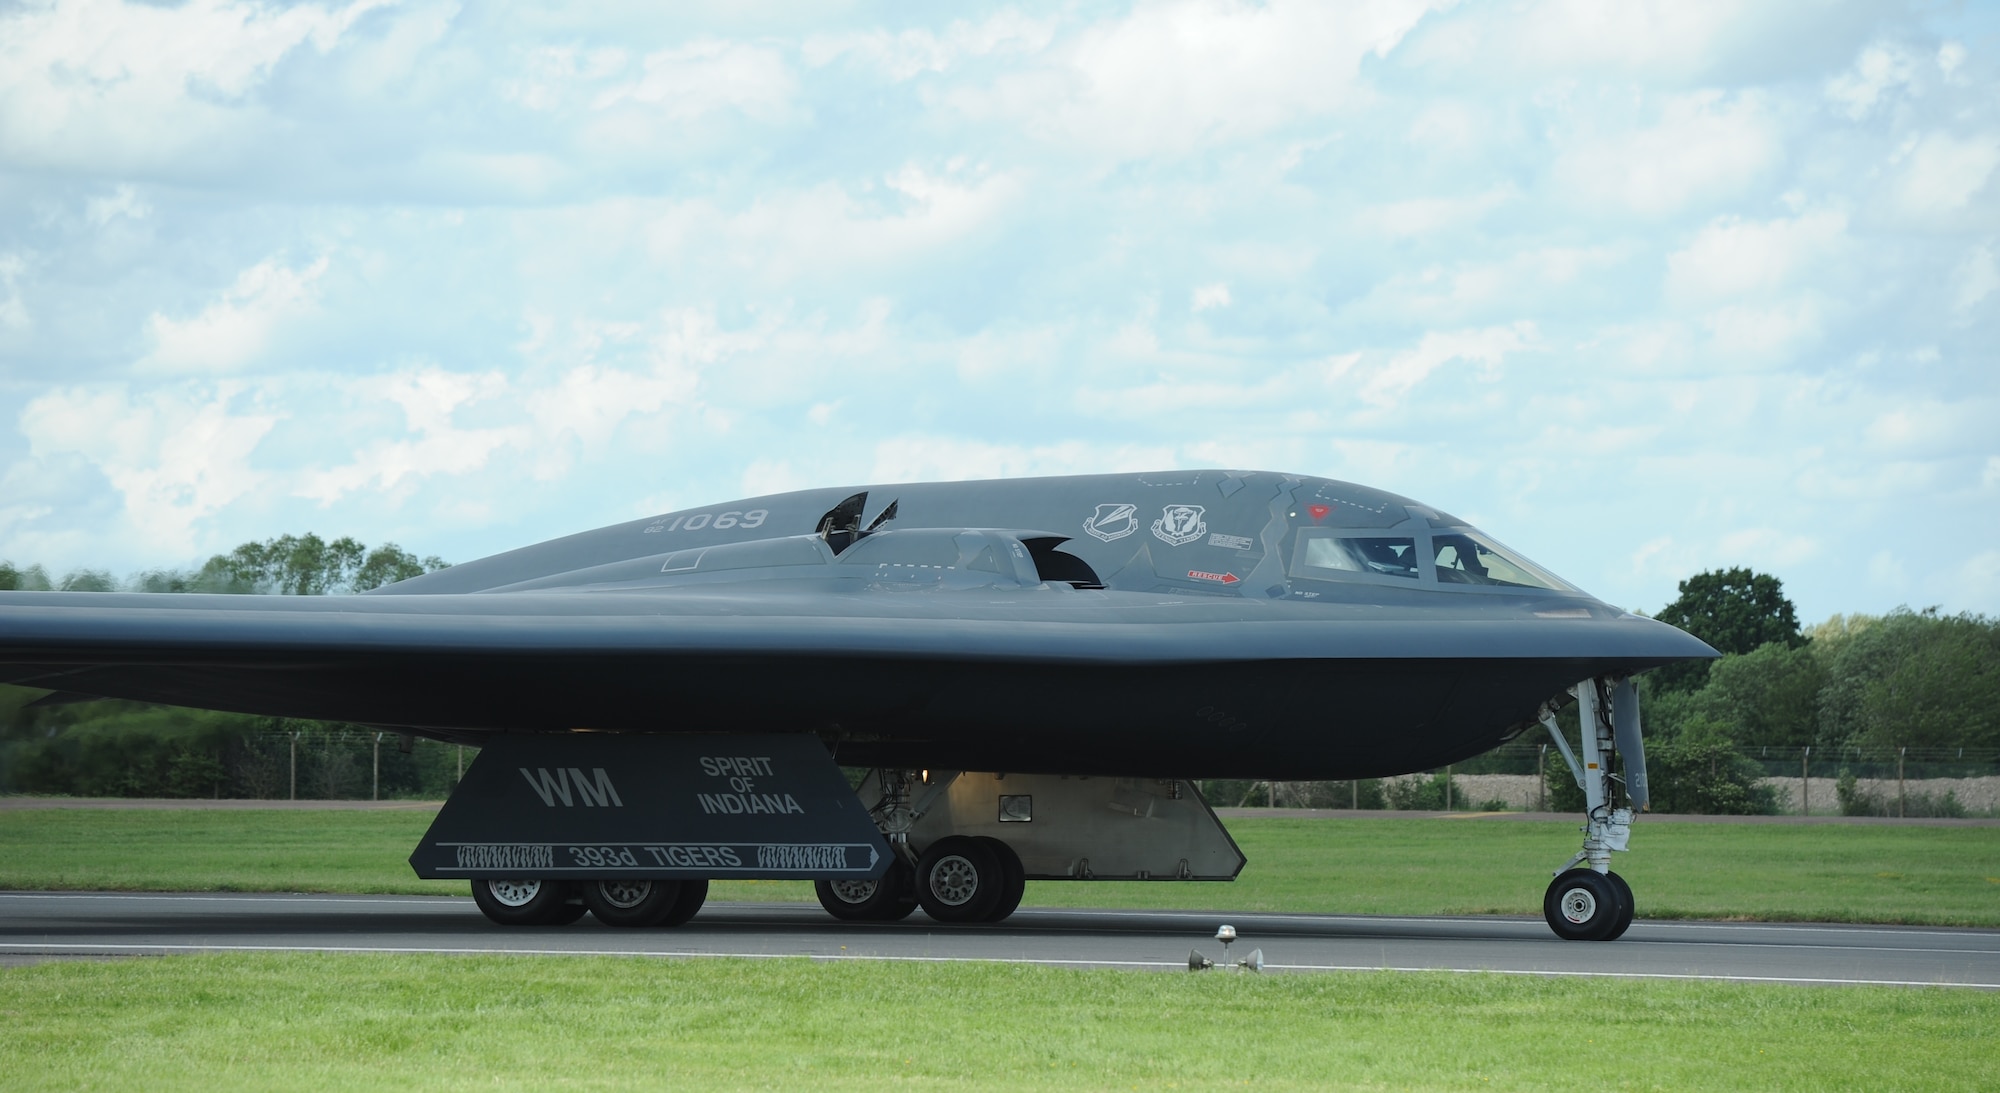 The “Spirit of Indiana,” a B-2 Spirit from Whiteman Air Force Base, Mo., taxis down the runway at RAF Fairford, England, June 8, 2014. The B-2 Spirit is a multi-role bomber capable of delivering both conventional and nuclear munitions. Its low-observable, or "stealth," characteristics give it the unique ability to penetrate an enemy's most sophisticated defenses and threaten its most valued, and heavily defended, targets. (U.S. Air Force photo by Staff Sgt. Nick Wilson/Released)